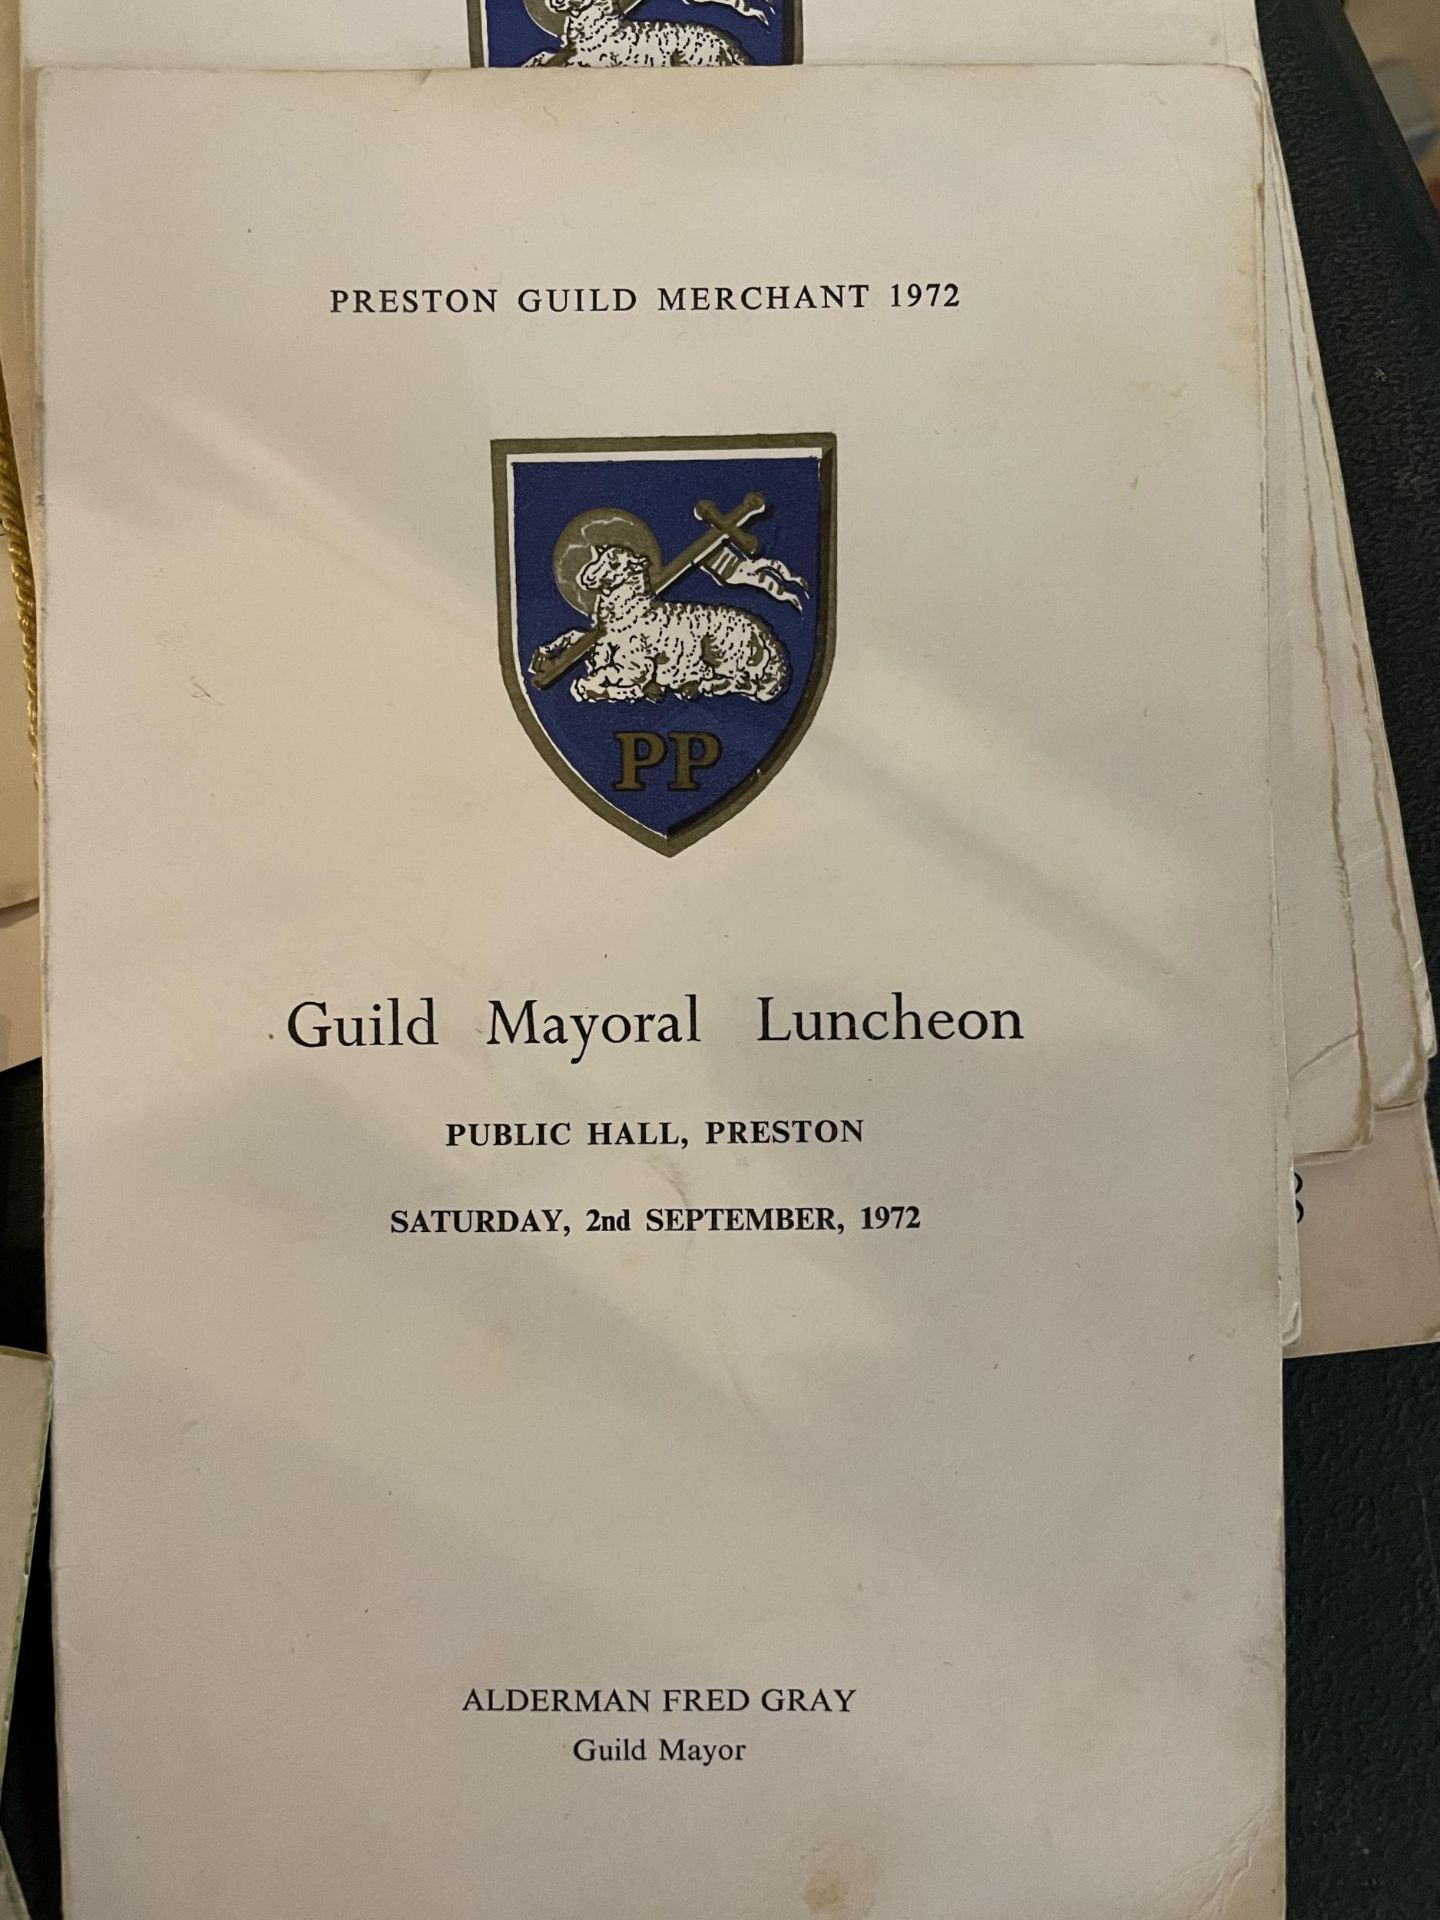 A COLLECTION OF LUNCHEON MENUS HOSTED BY THE CITY OF MANCHESTER ATTENDED BY ROYALTY, ALSO MENUS - Image 4 of 6